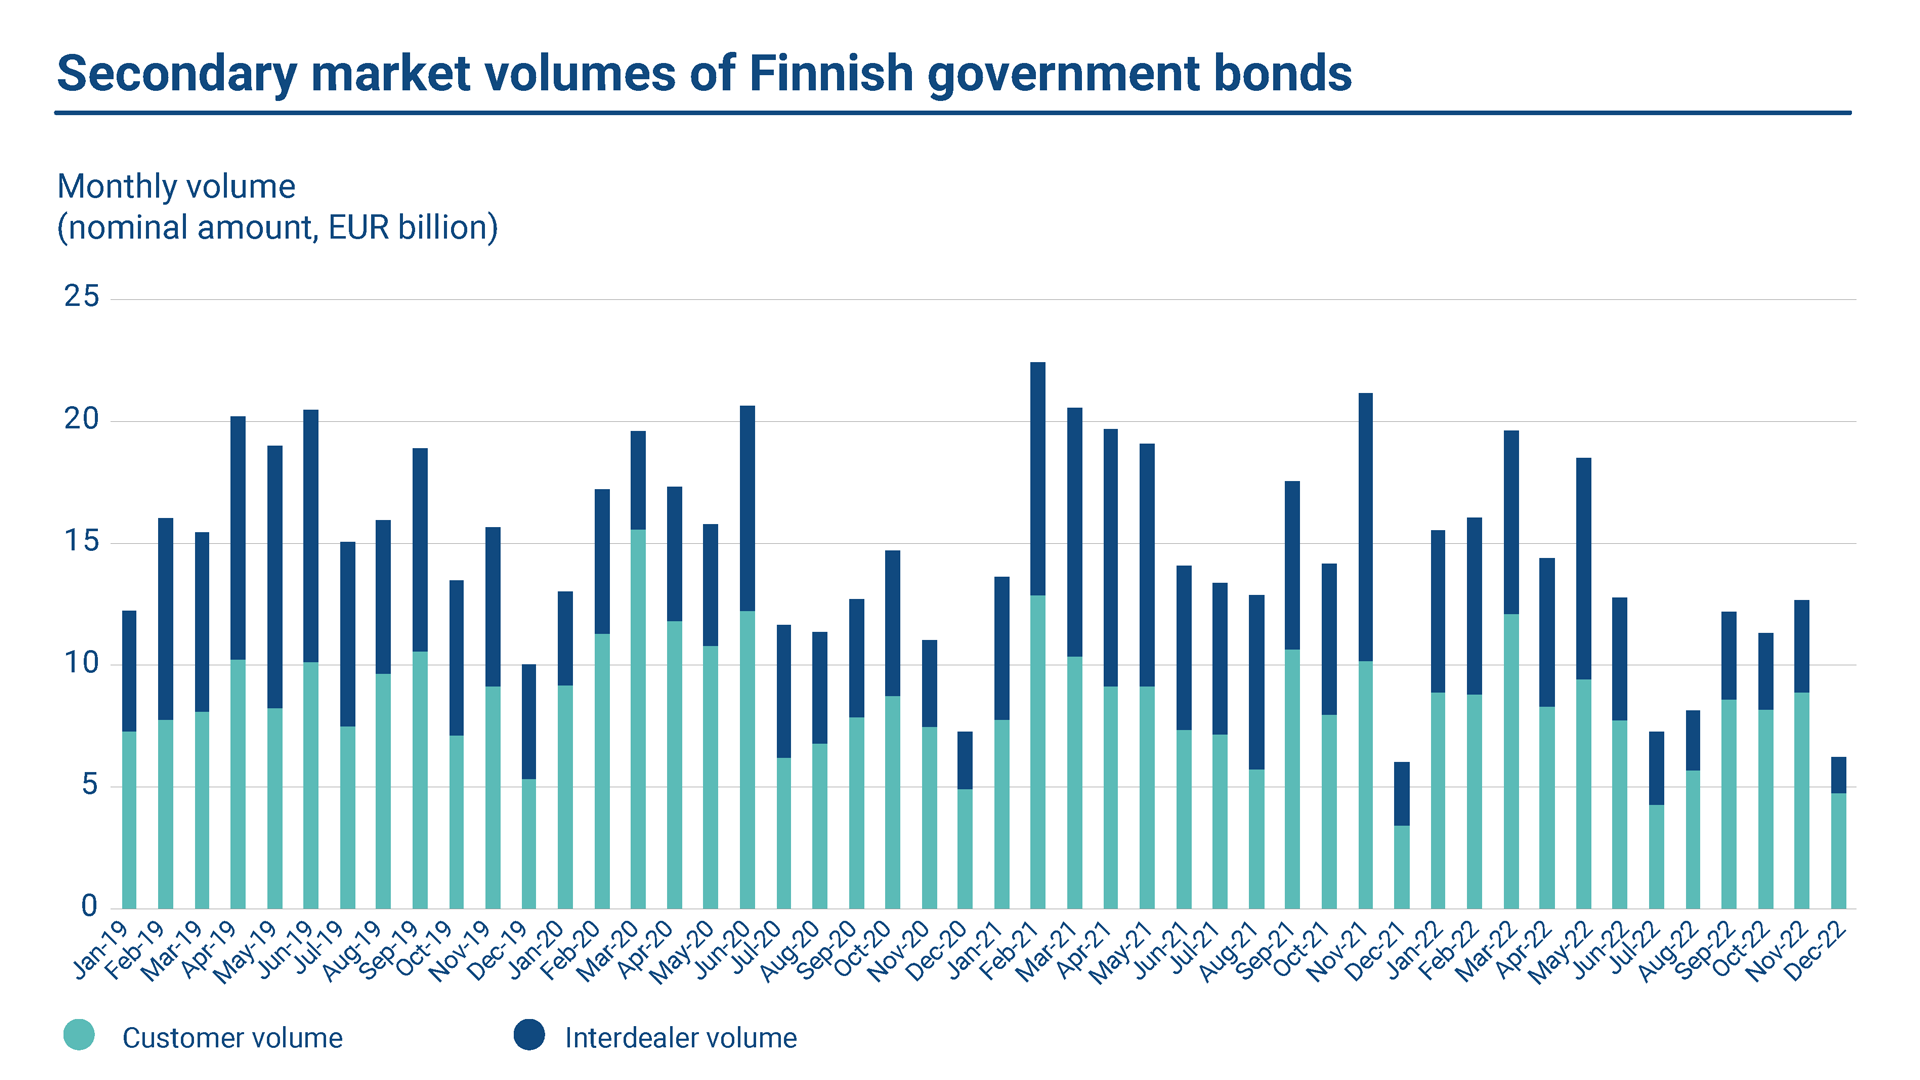 The graph shows the secondary market volumes of Finnish government bonds in 2019-22. In 2022, the nominal interdealer trading volume was on average EUR 4.91 billion per month. The average monthly customer volume was EUR 7.98 billion.